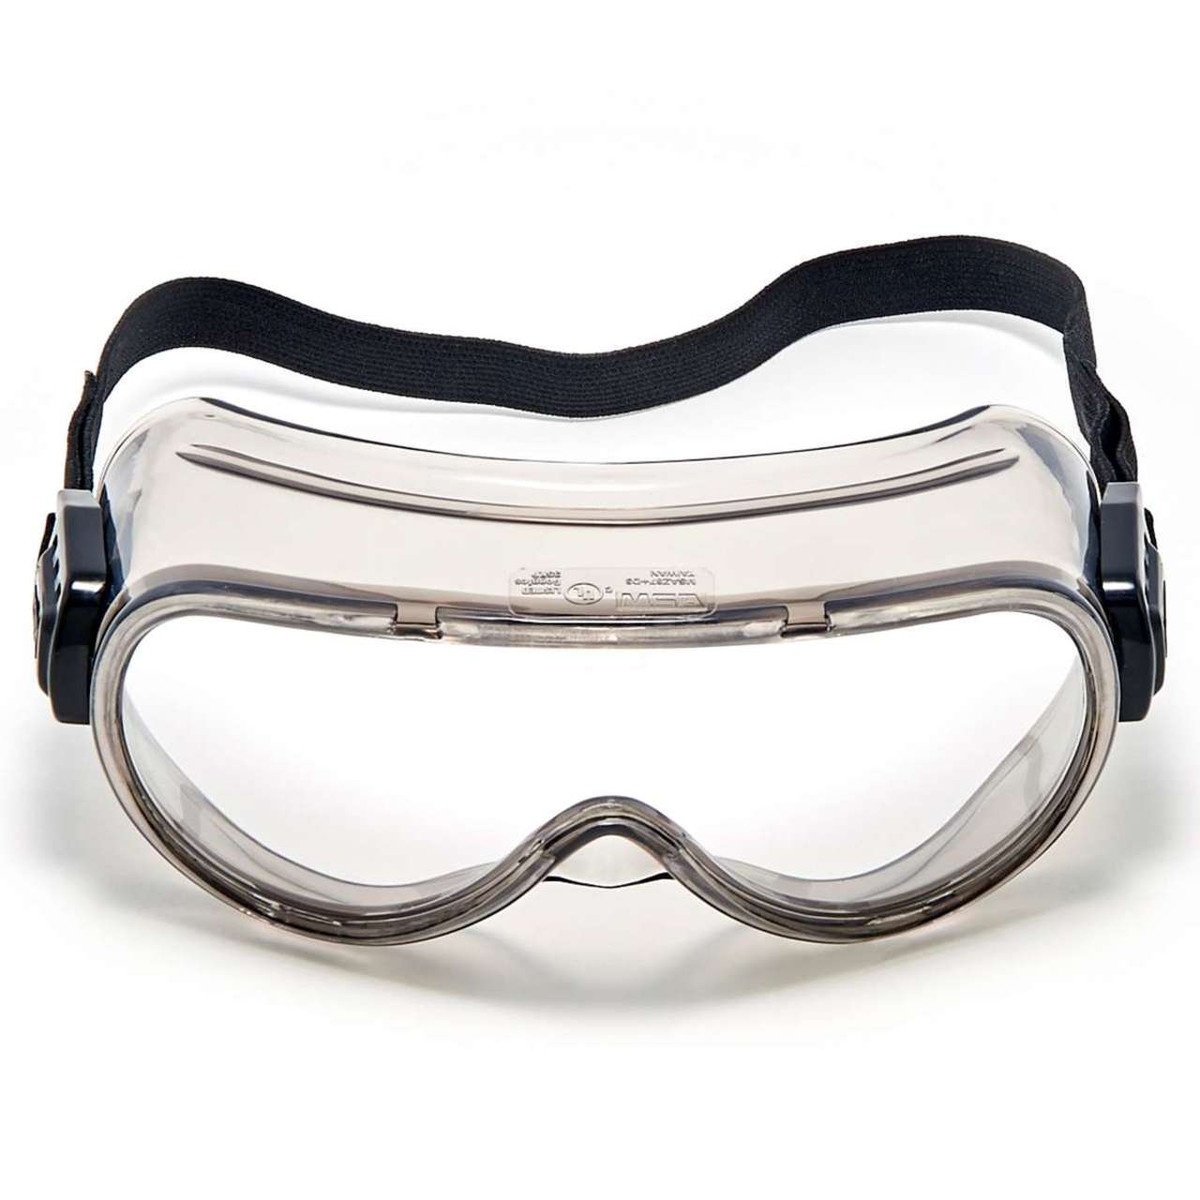 Anthropologist Goggles With Magnifiers - Clear Lenses